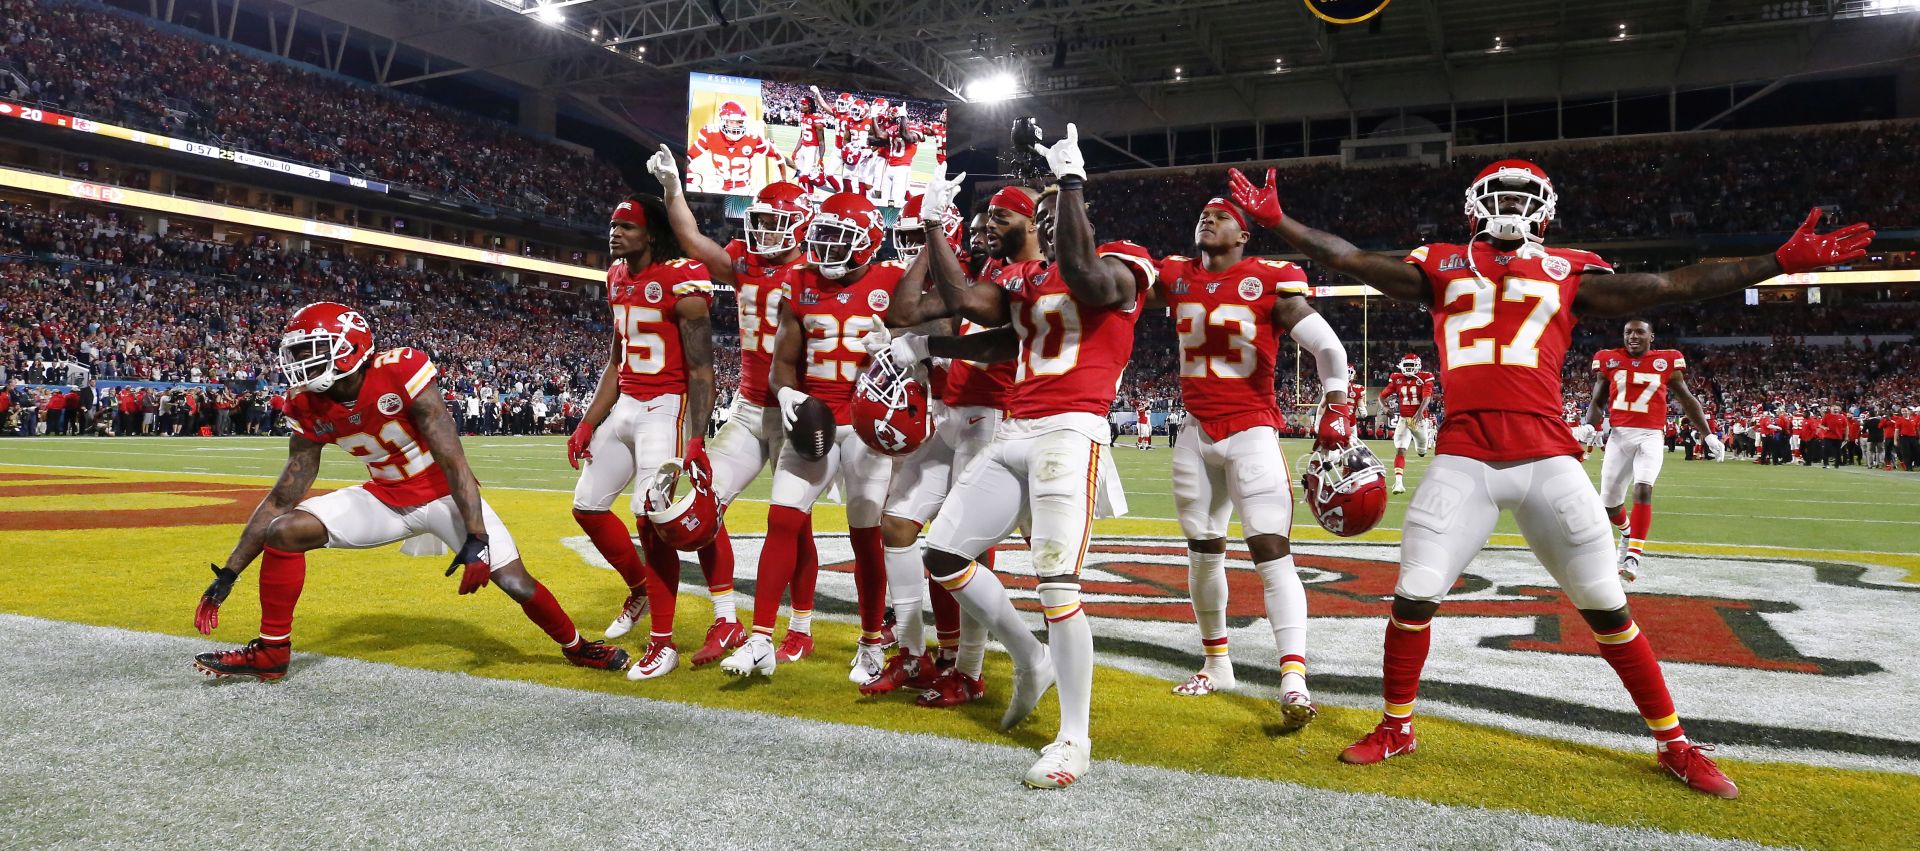 epa08189605 Kansas City Chiefs players celebrate an interception in the final minutes against the San Francisco 49ers shortly before winning the National Football League Super Bowl LIV at Hard Rock Stadium in Miami Gardens, Florida, USA, 02 February 2020.  EPA/LARRY W. SMITH